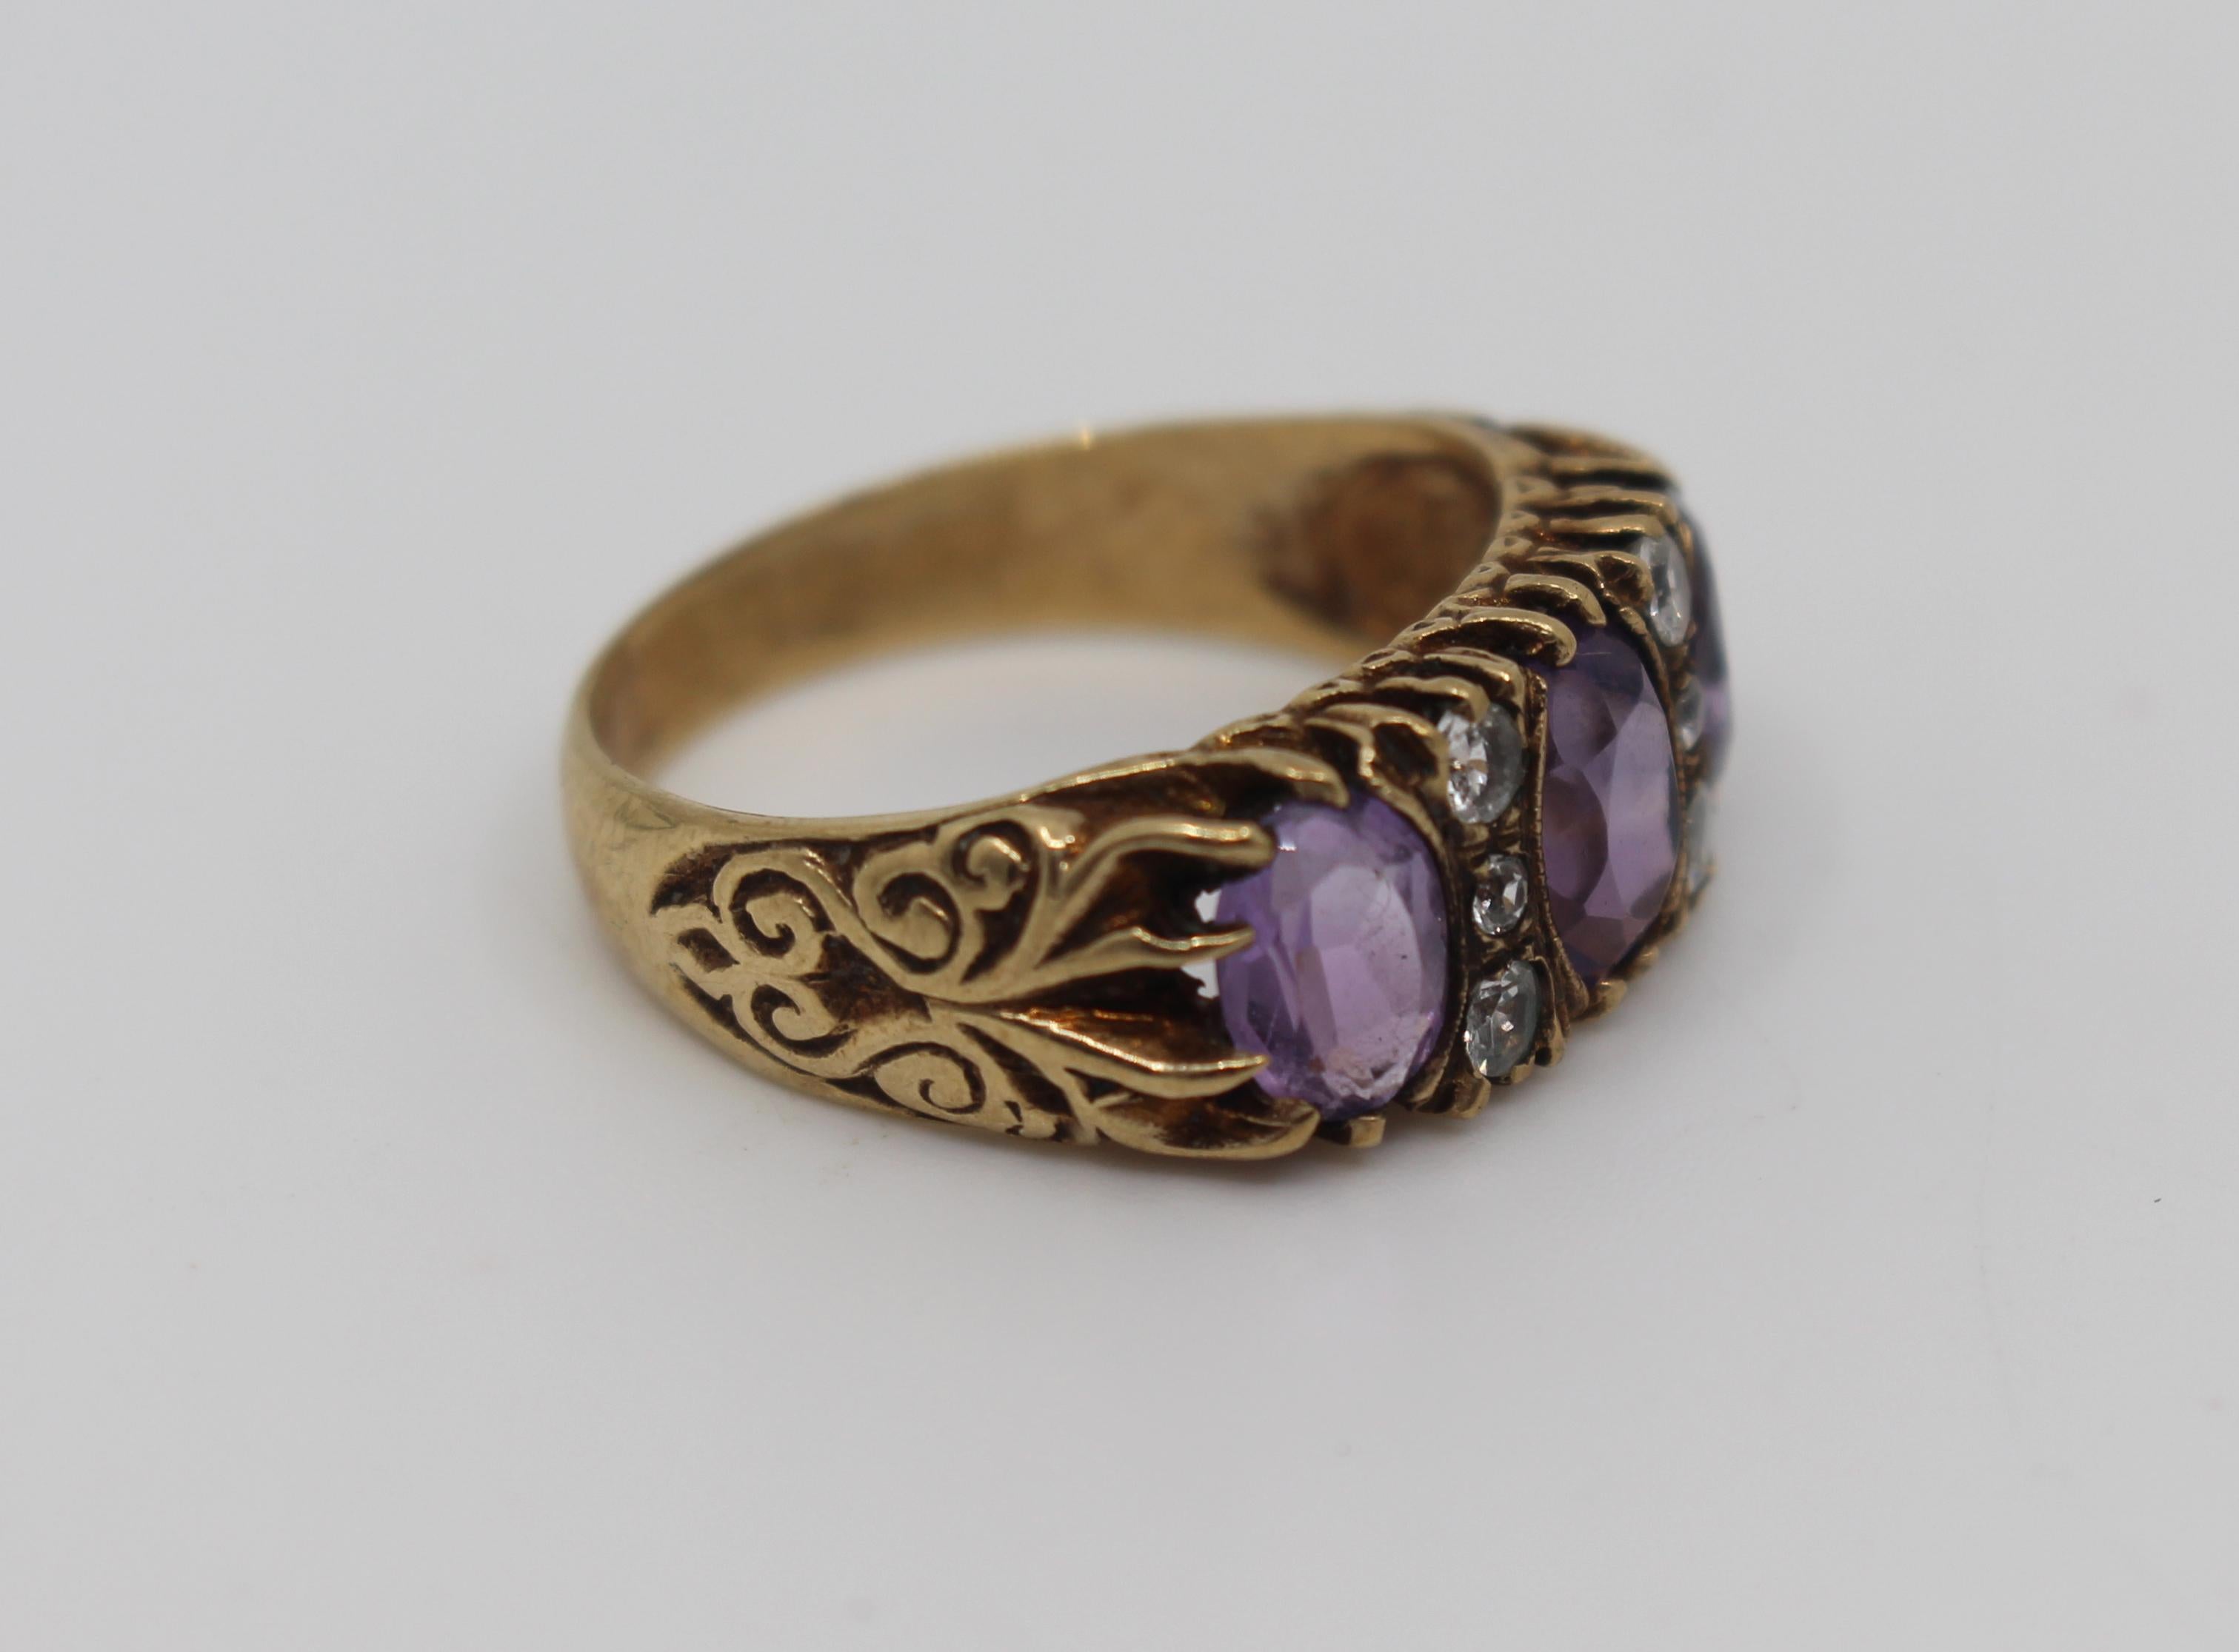 Period 
20th century, vintage

Hallmark Birmingham, dated 1972
Stones 3 amethysts, interest with gemstones probably spinel’s
Gold 9-carat rose gold, fully hallmarked
Weight 5 g
Ring size R 1/2 (UK), 9 (US)
Condition: Very good vintage